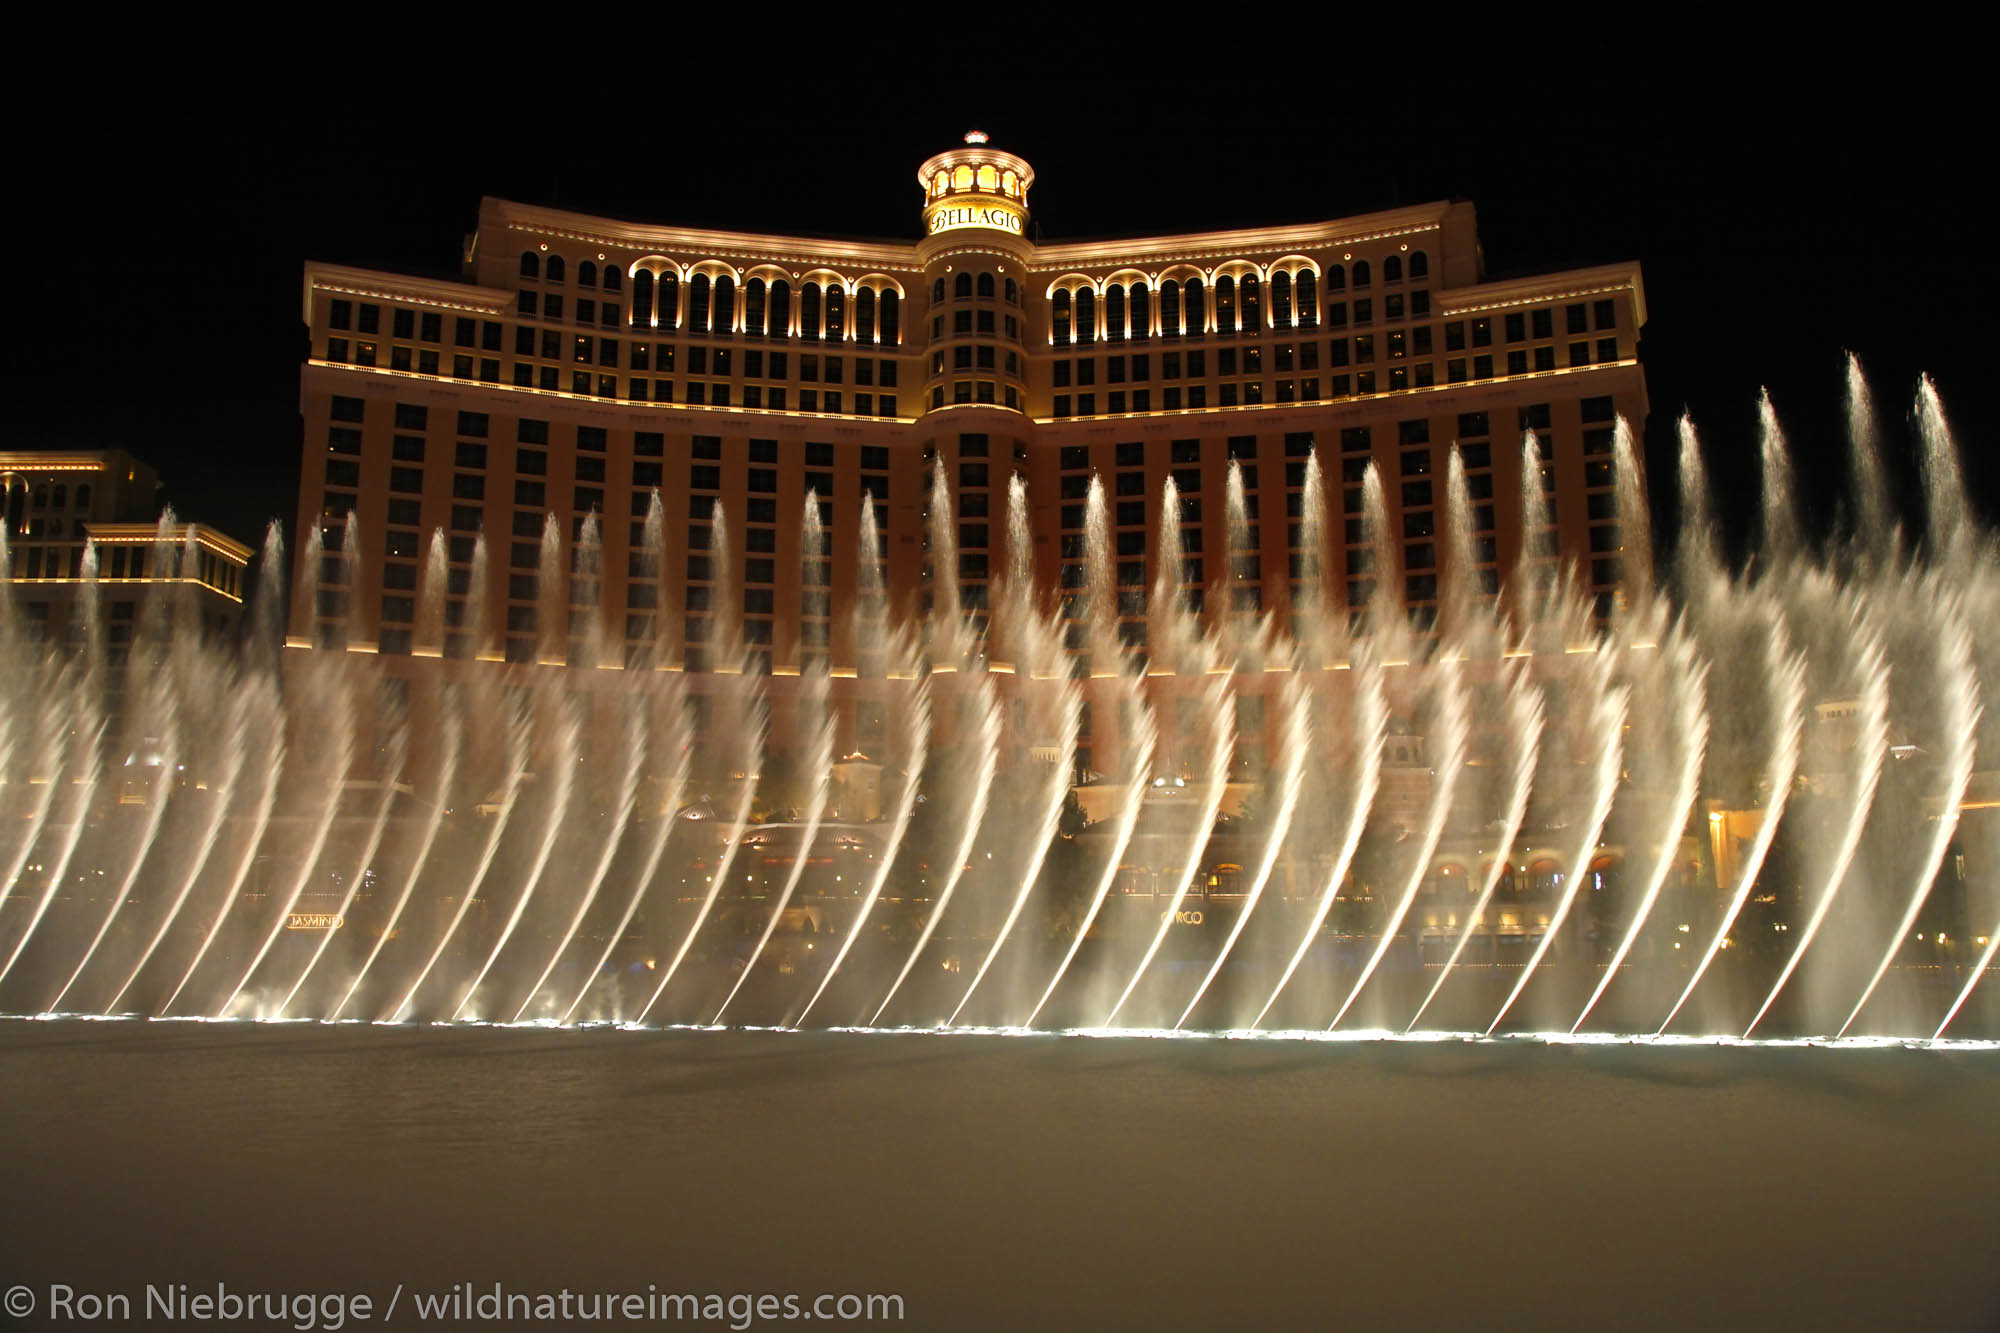 The fountain show in front of Bellagio Hotel and Casino on the Las Vegas Strip, Nevada.